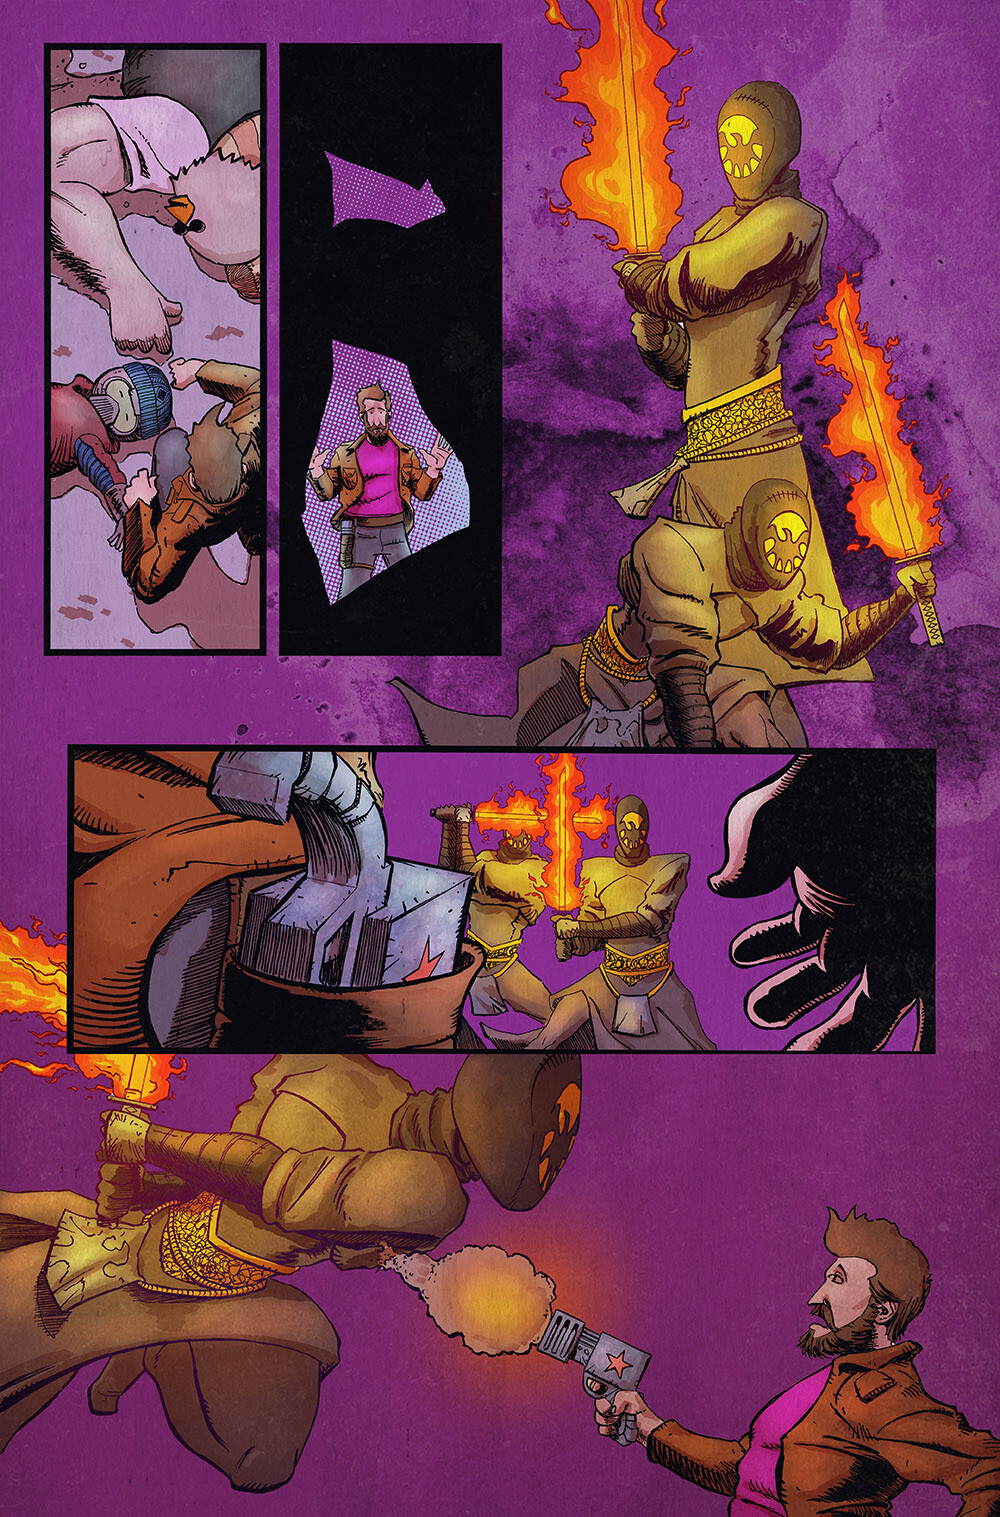 Vagrant Queen: A Planet Called Doom #2 pg 10